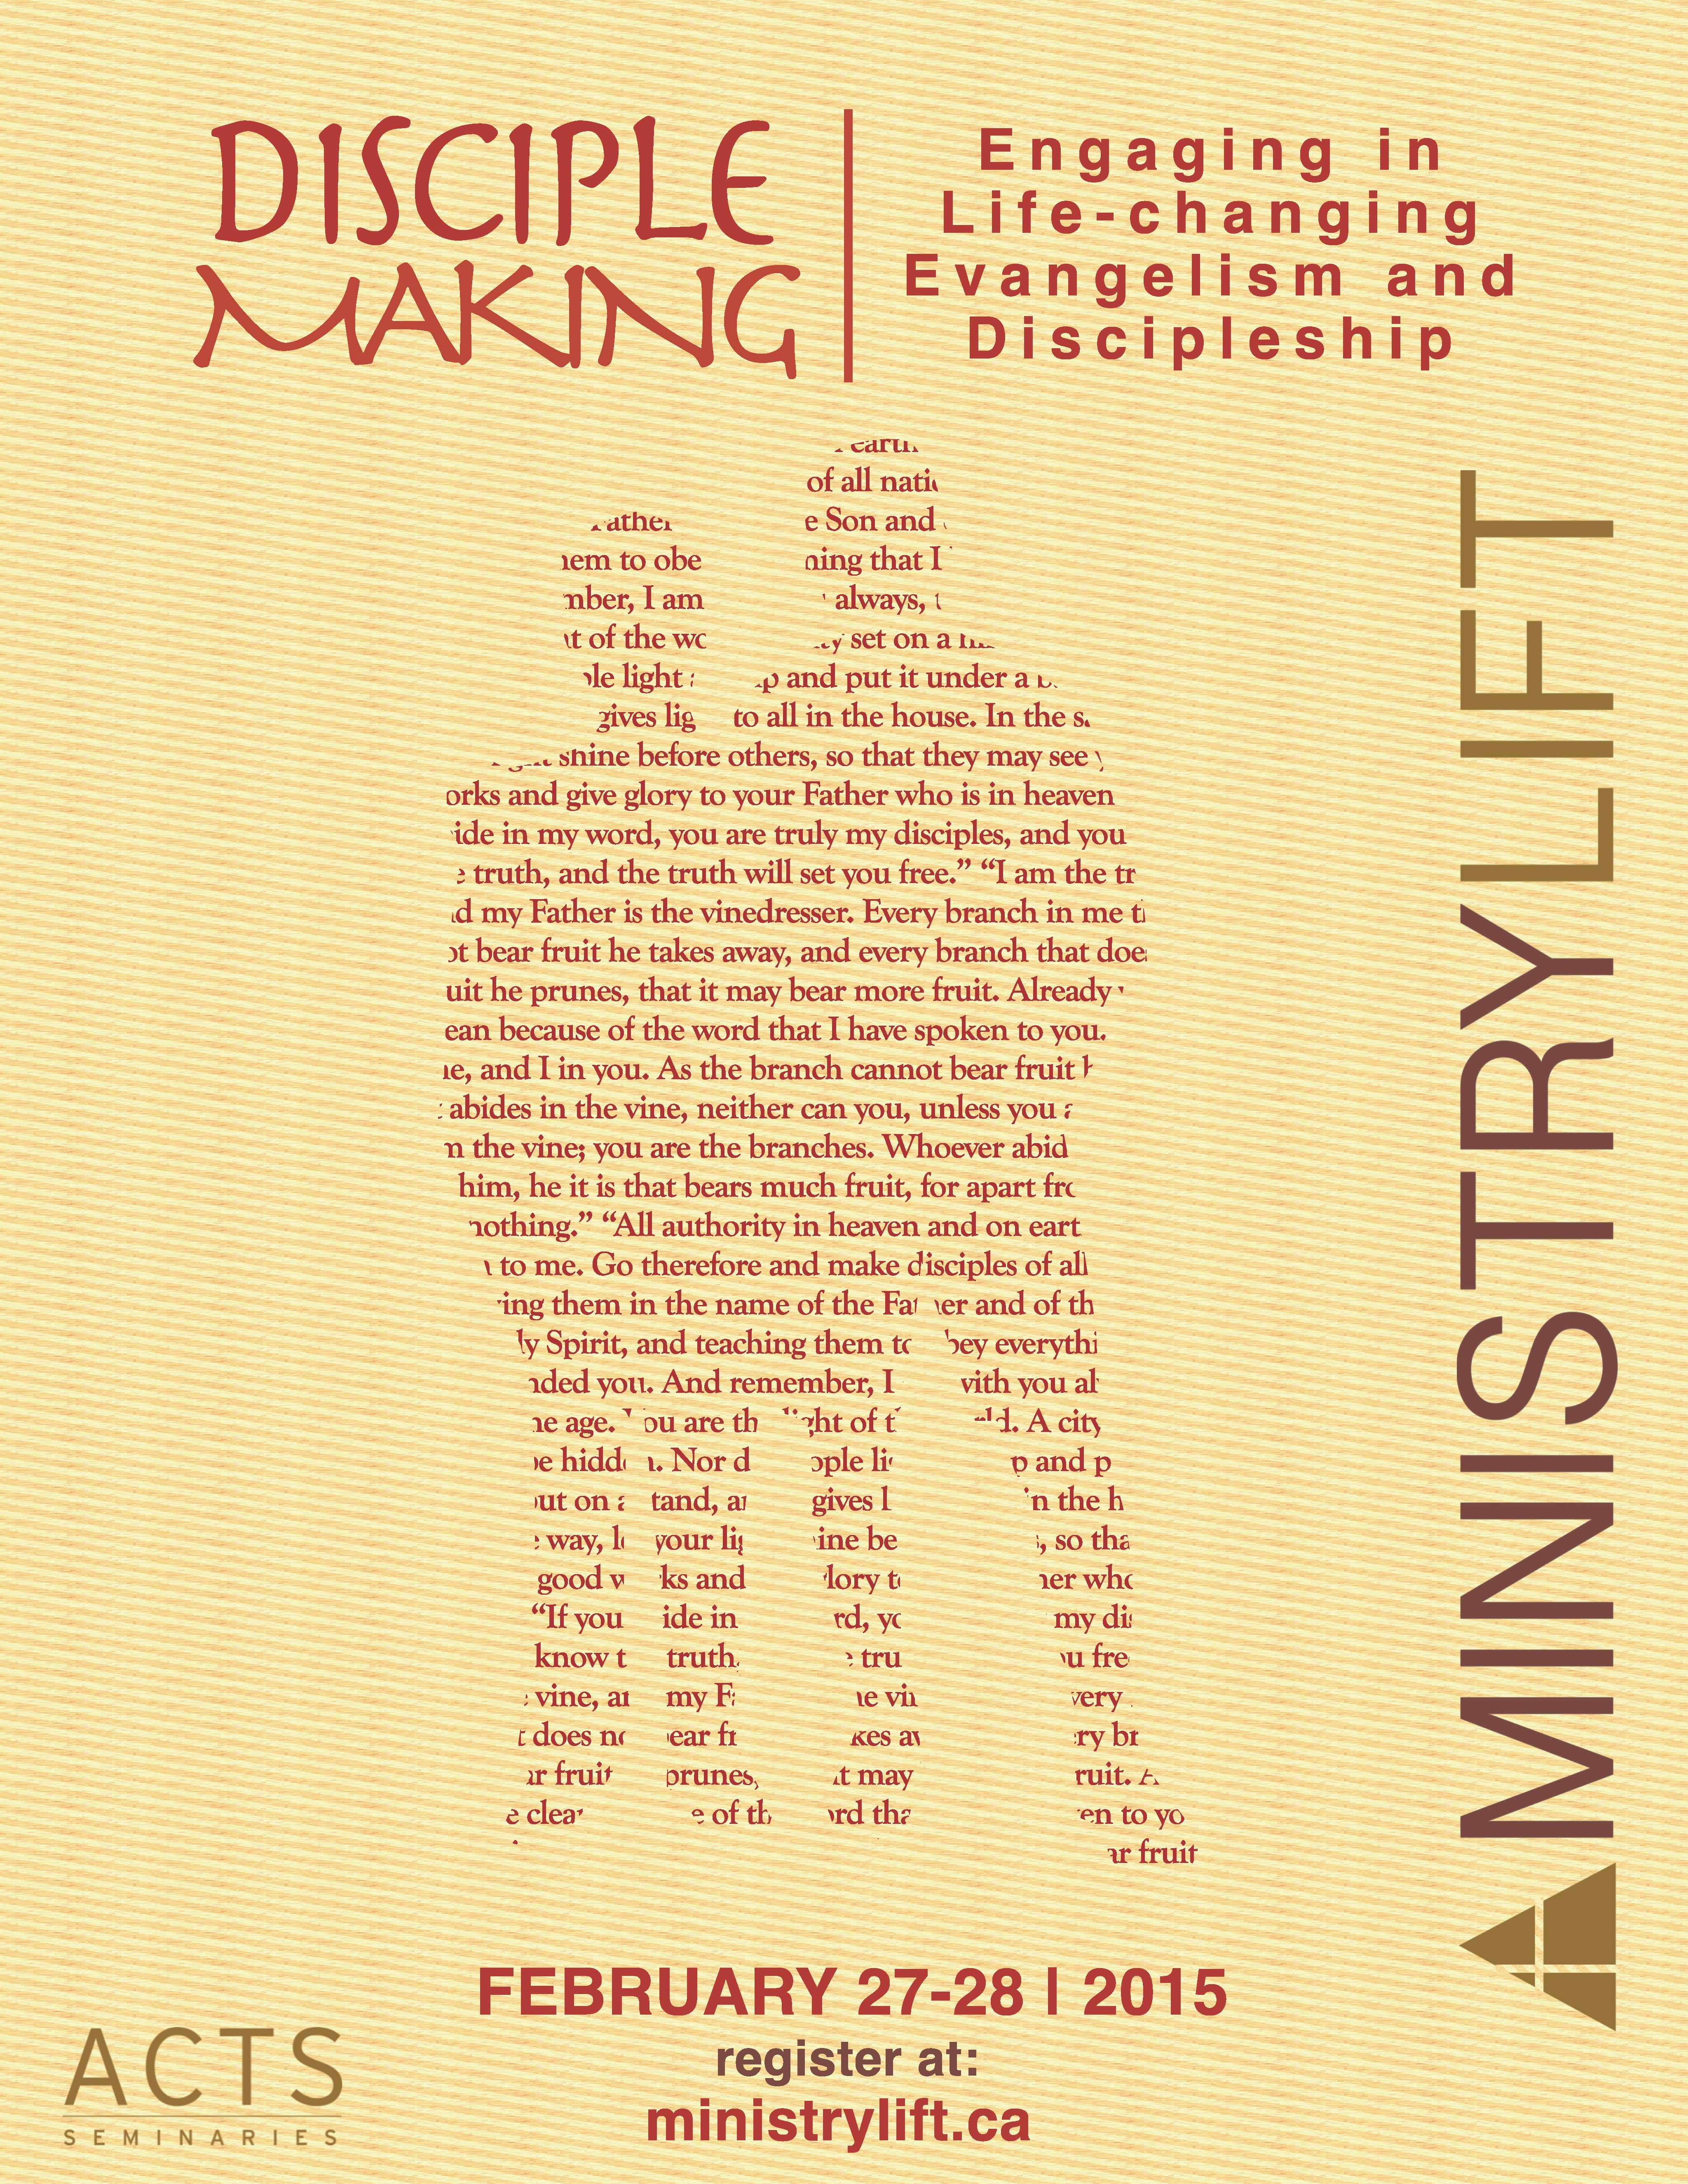 Graphic for Disciple-making - Engaging in Life-changing Evangelism and Discipleship